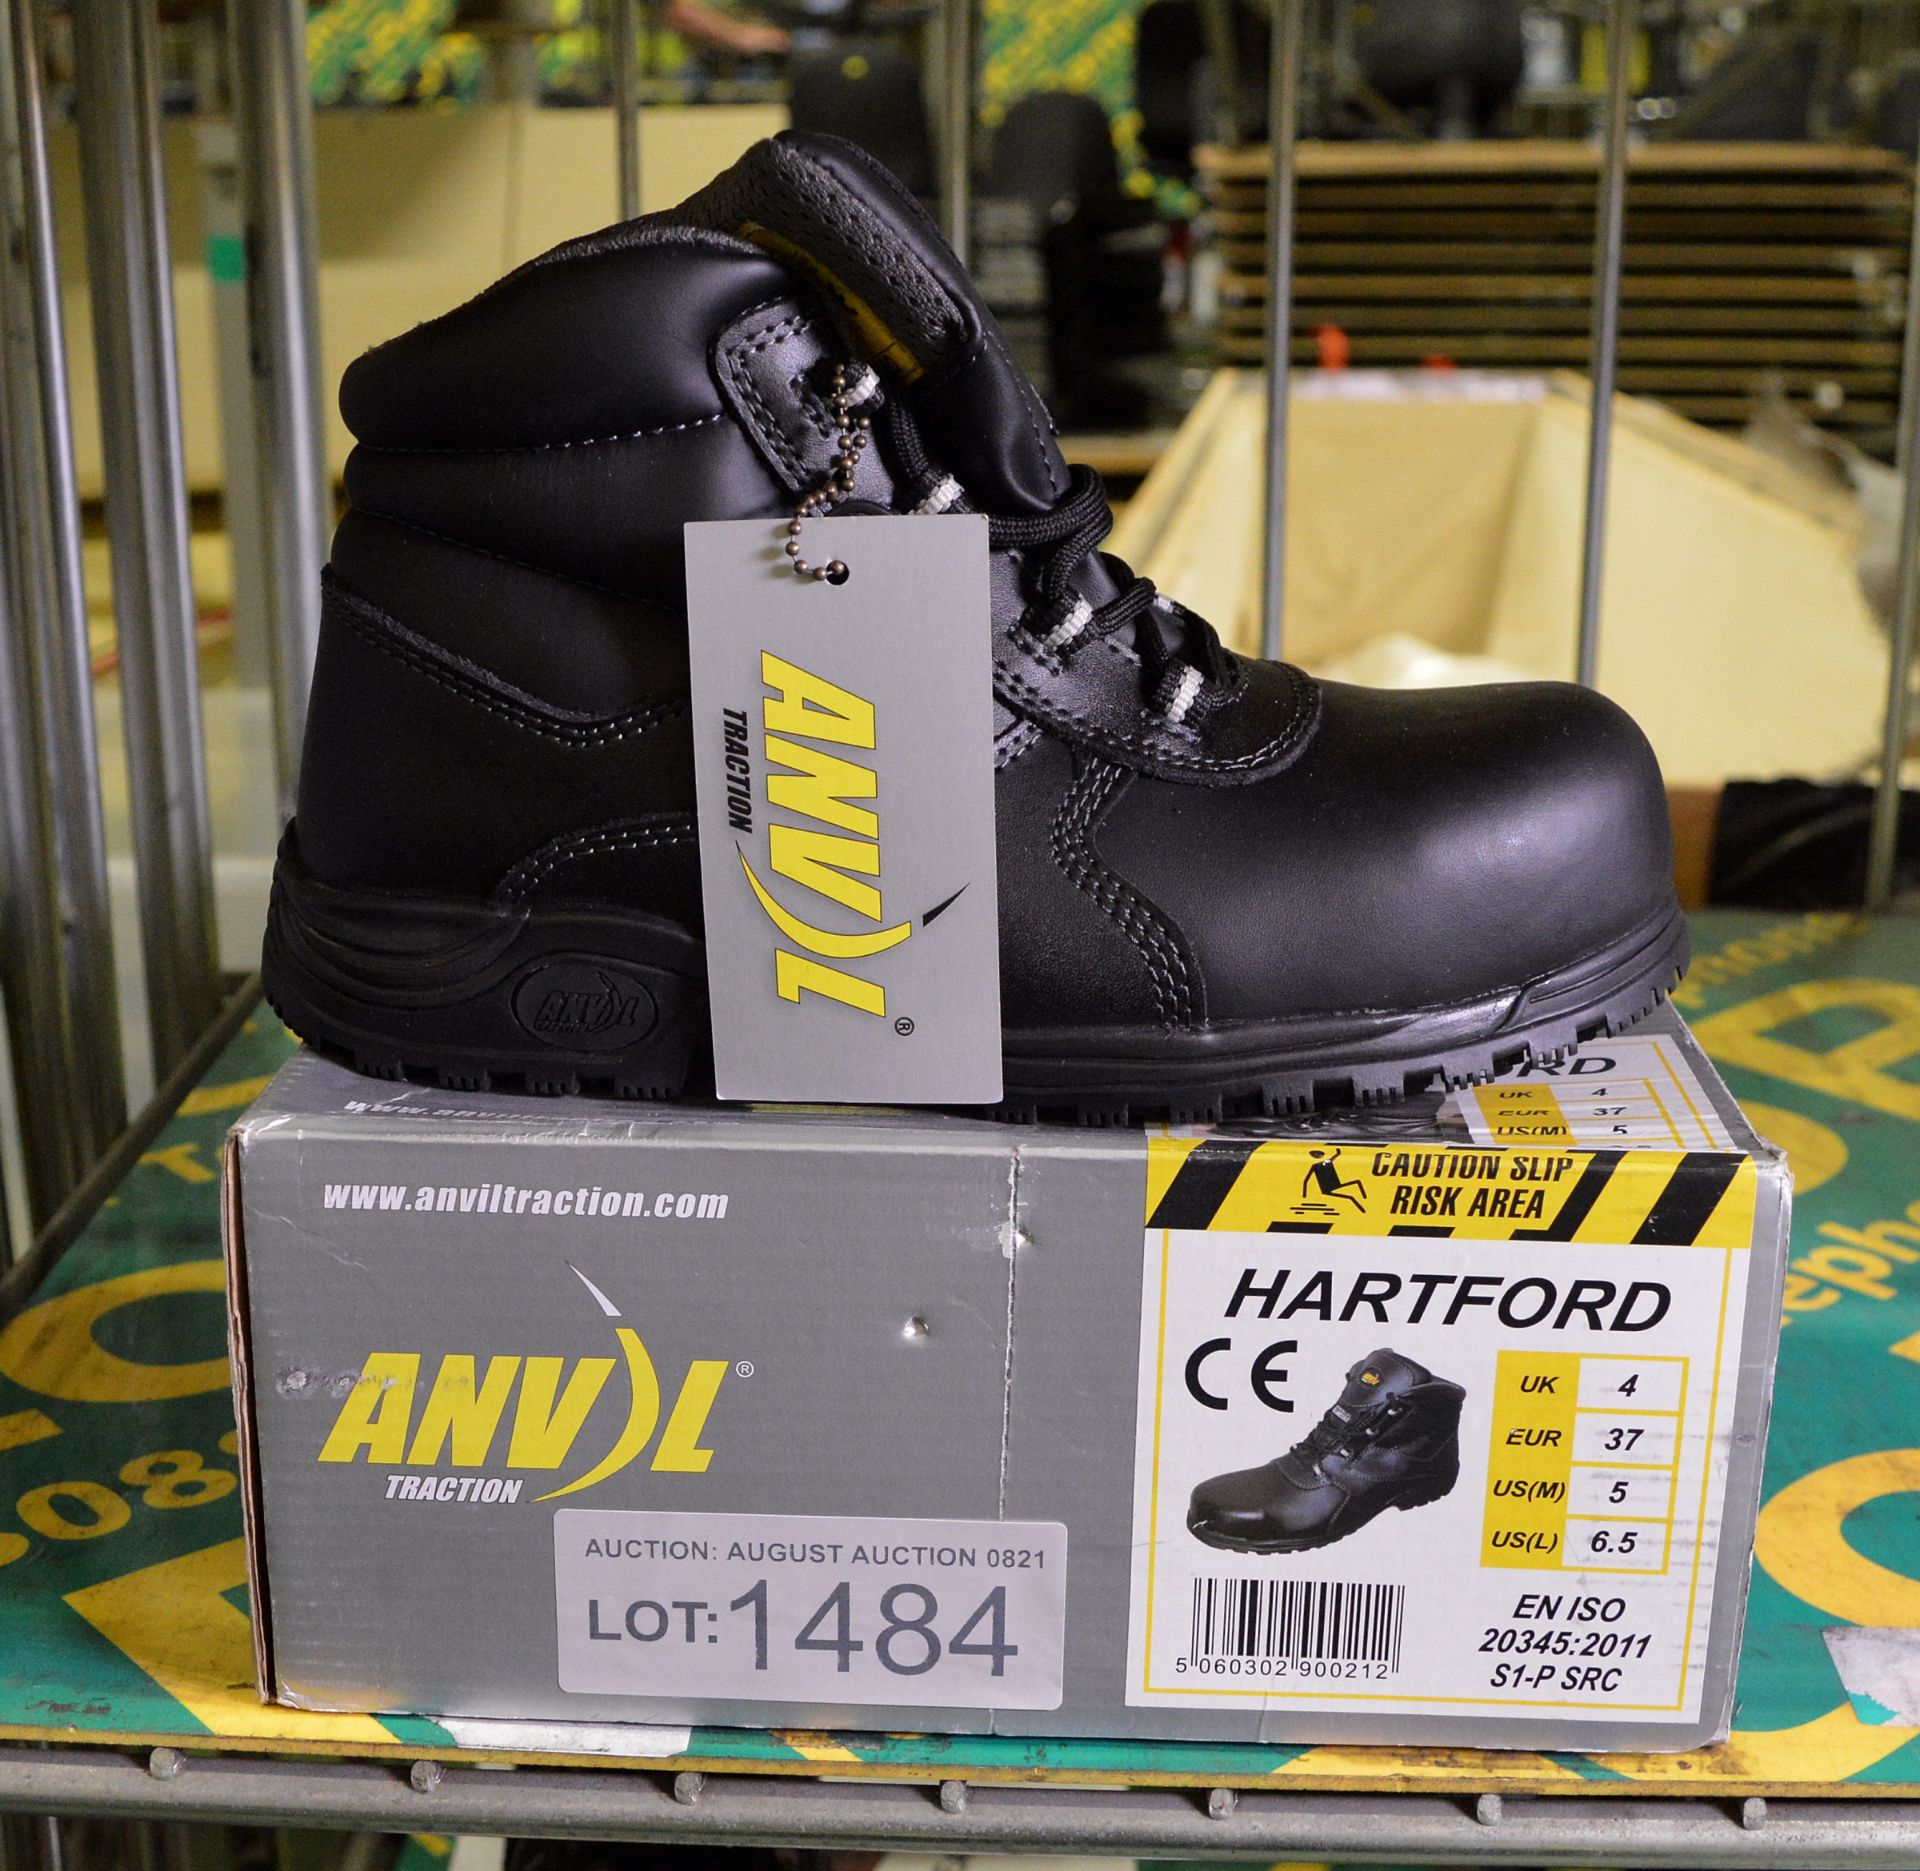 Anvil Traction safety boots - see pictures for types & size